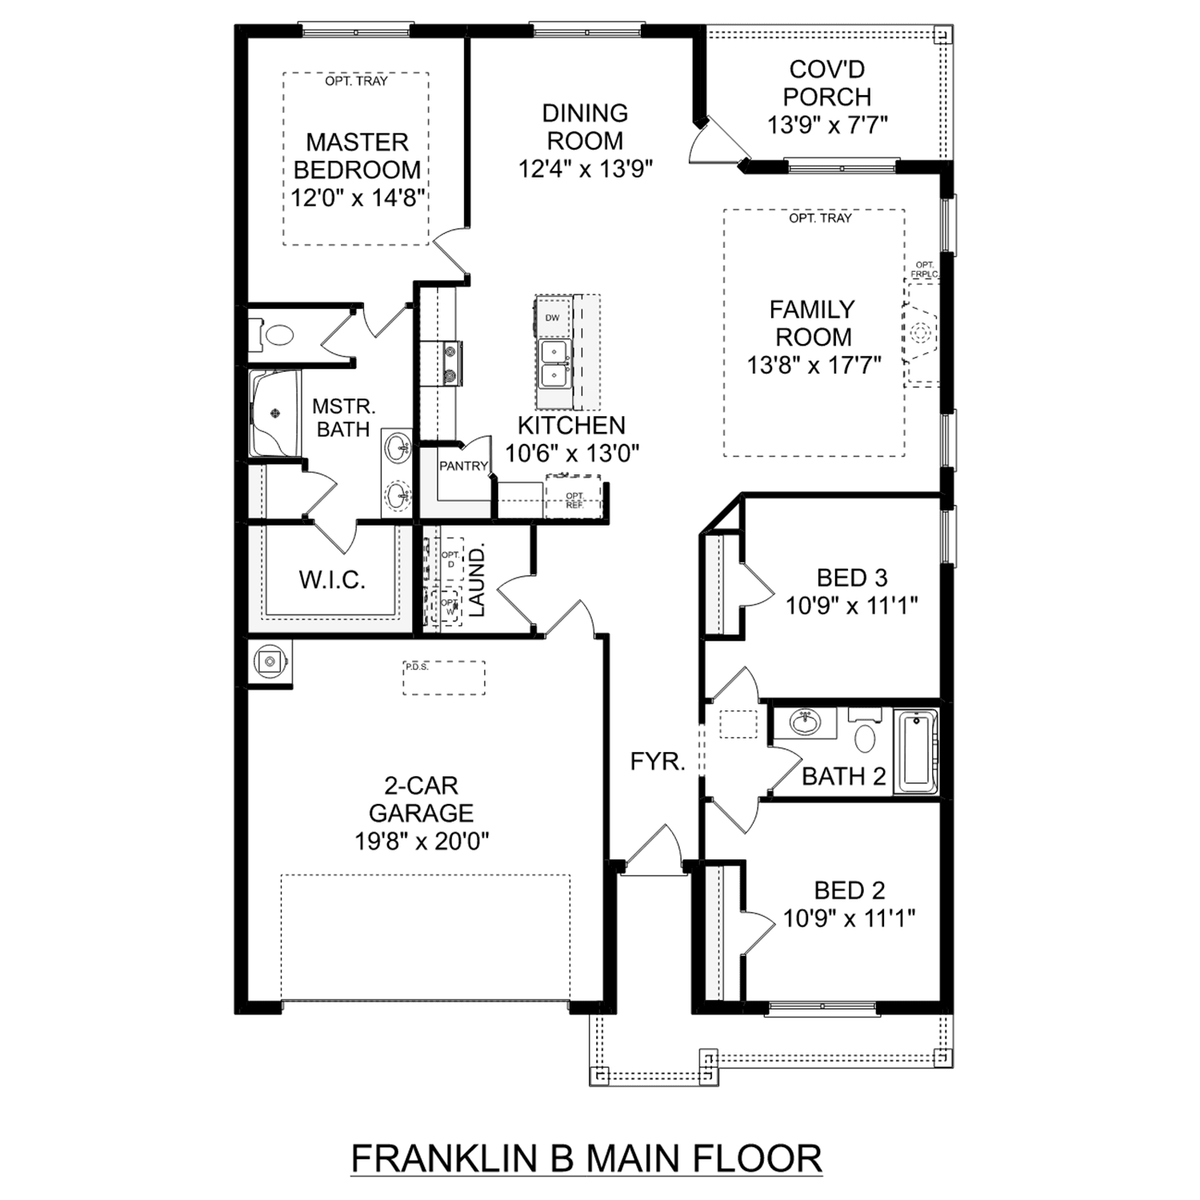 1 - The Franklin B buildable floor plan layout in Davidson Homes' Spragins Cove community.